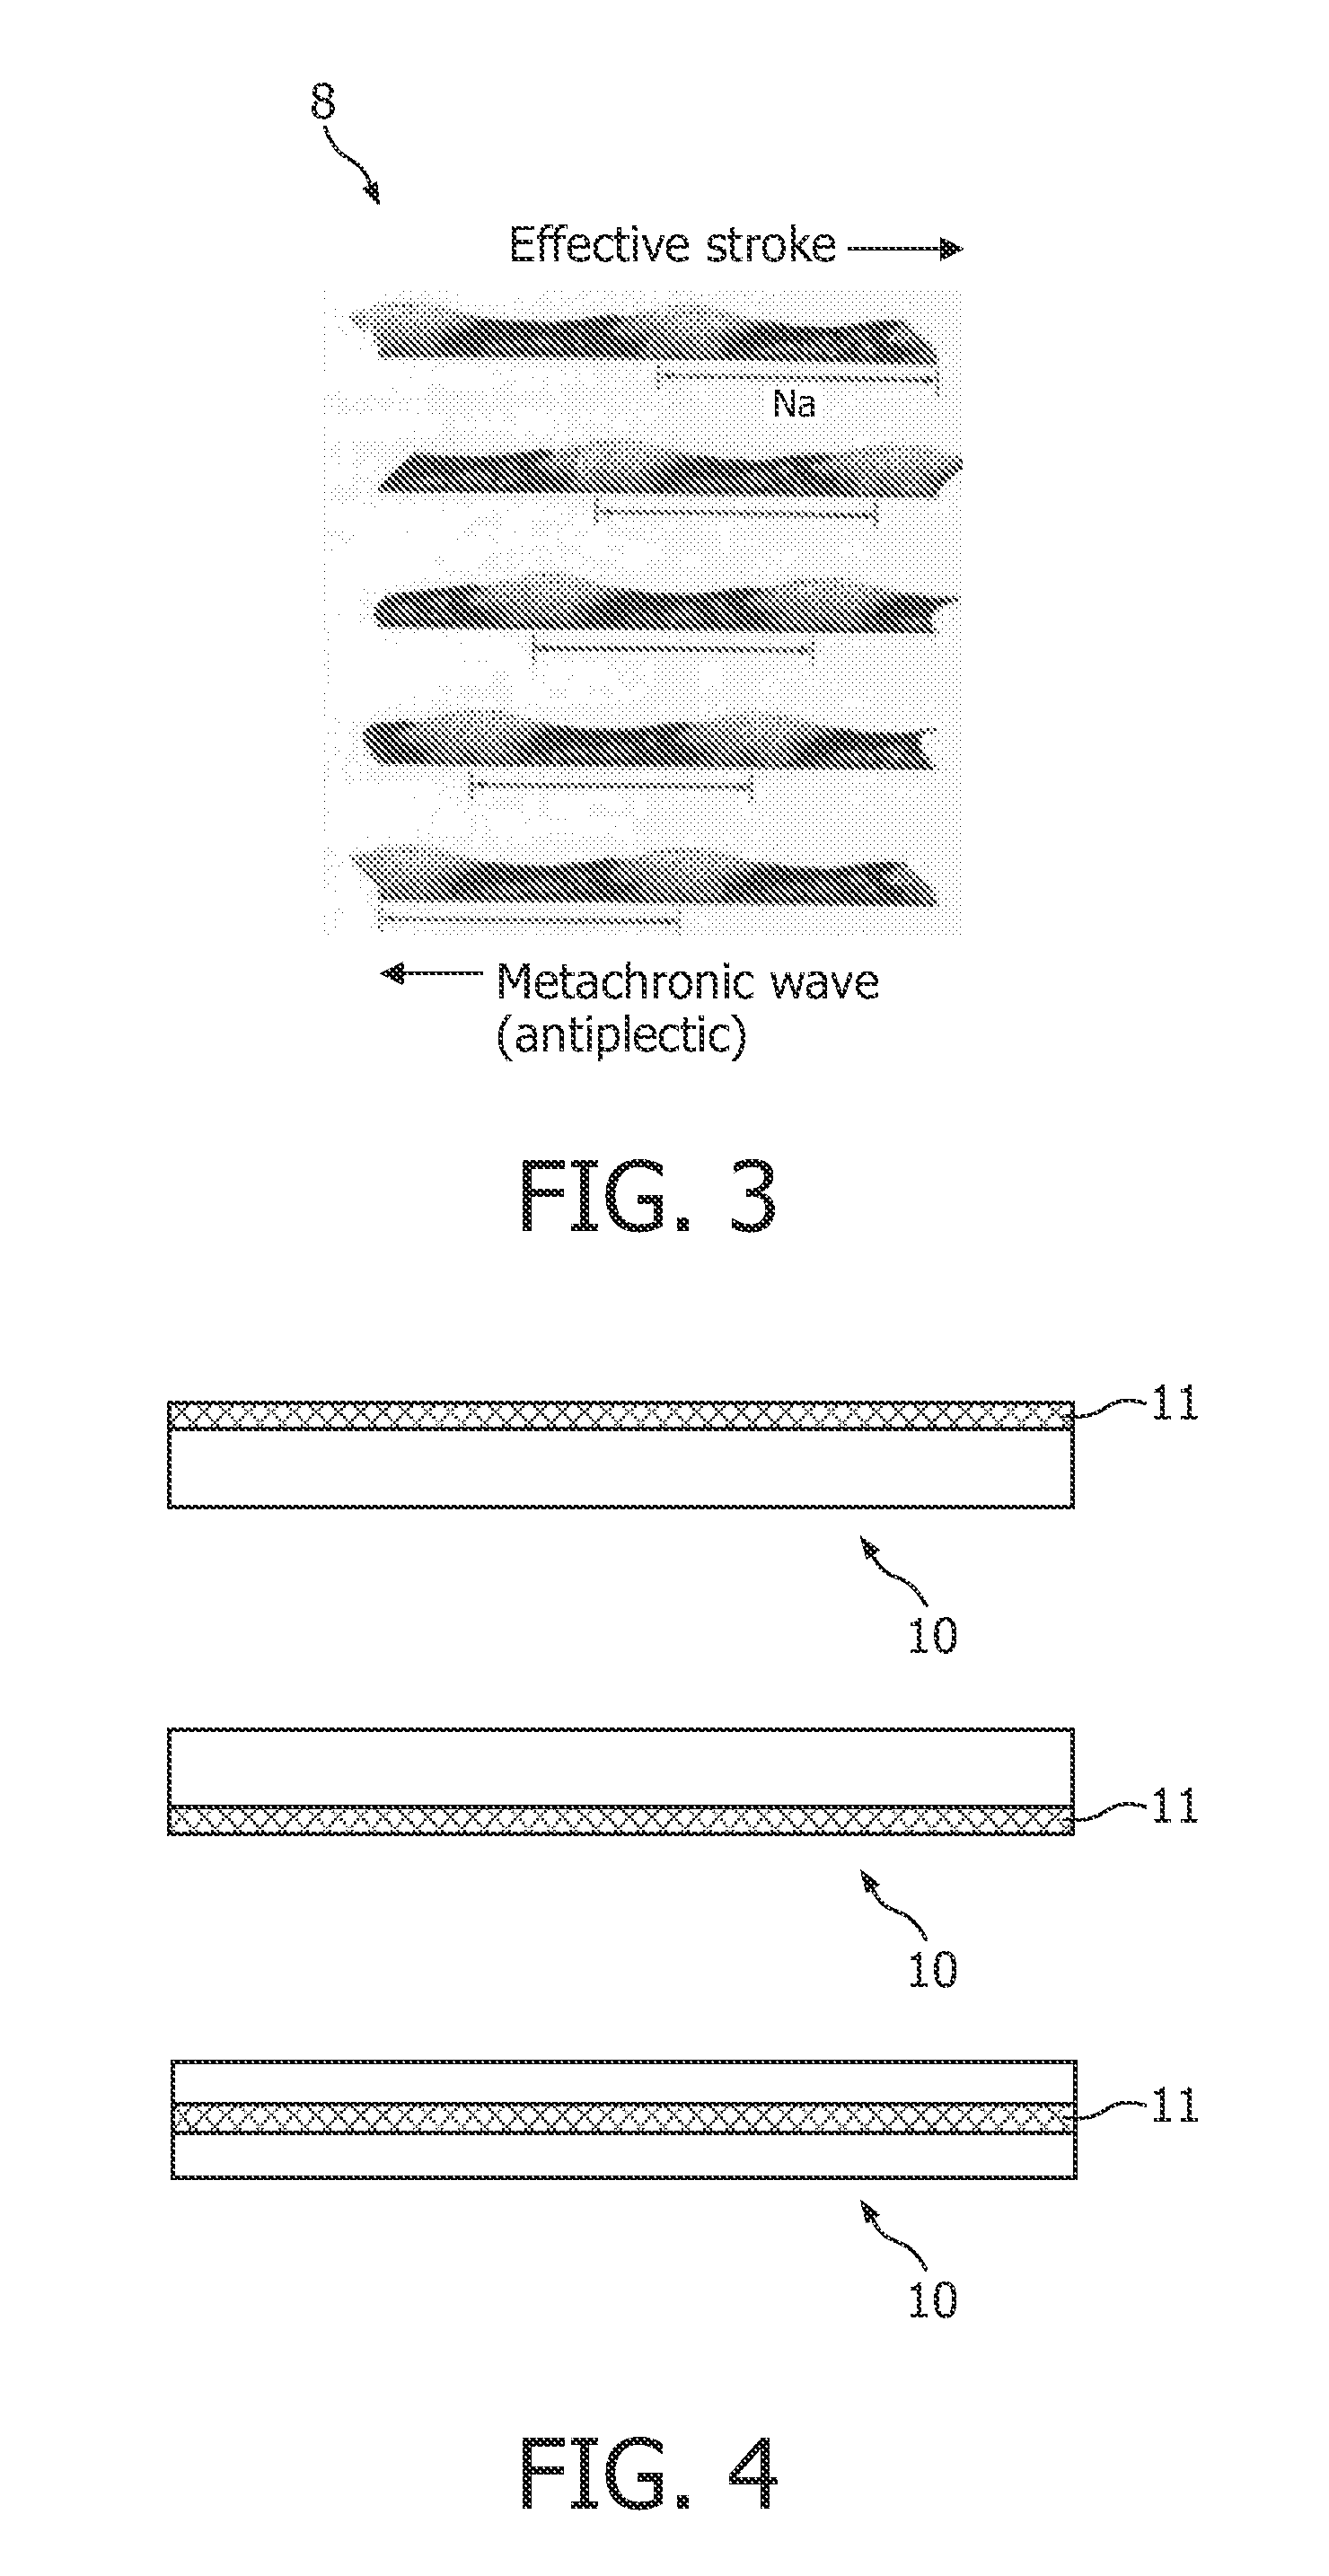 Microfluidic system based on actuator elements